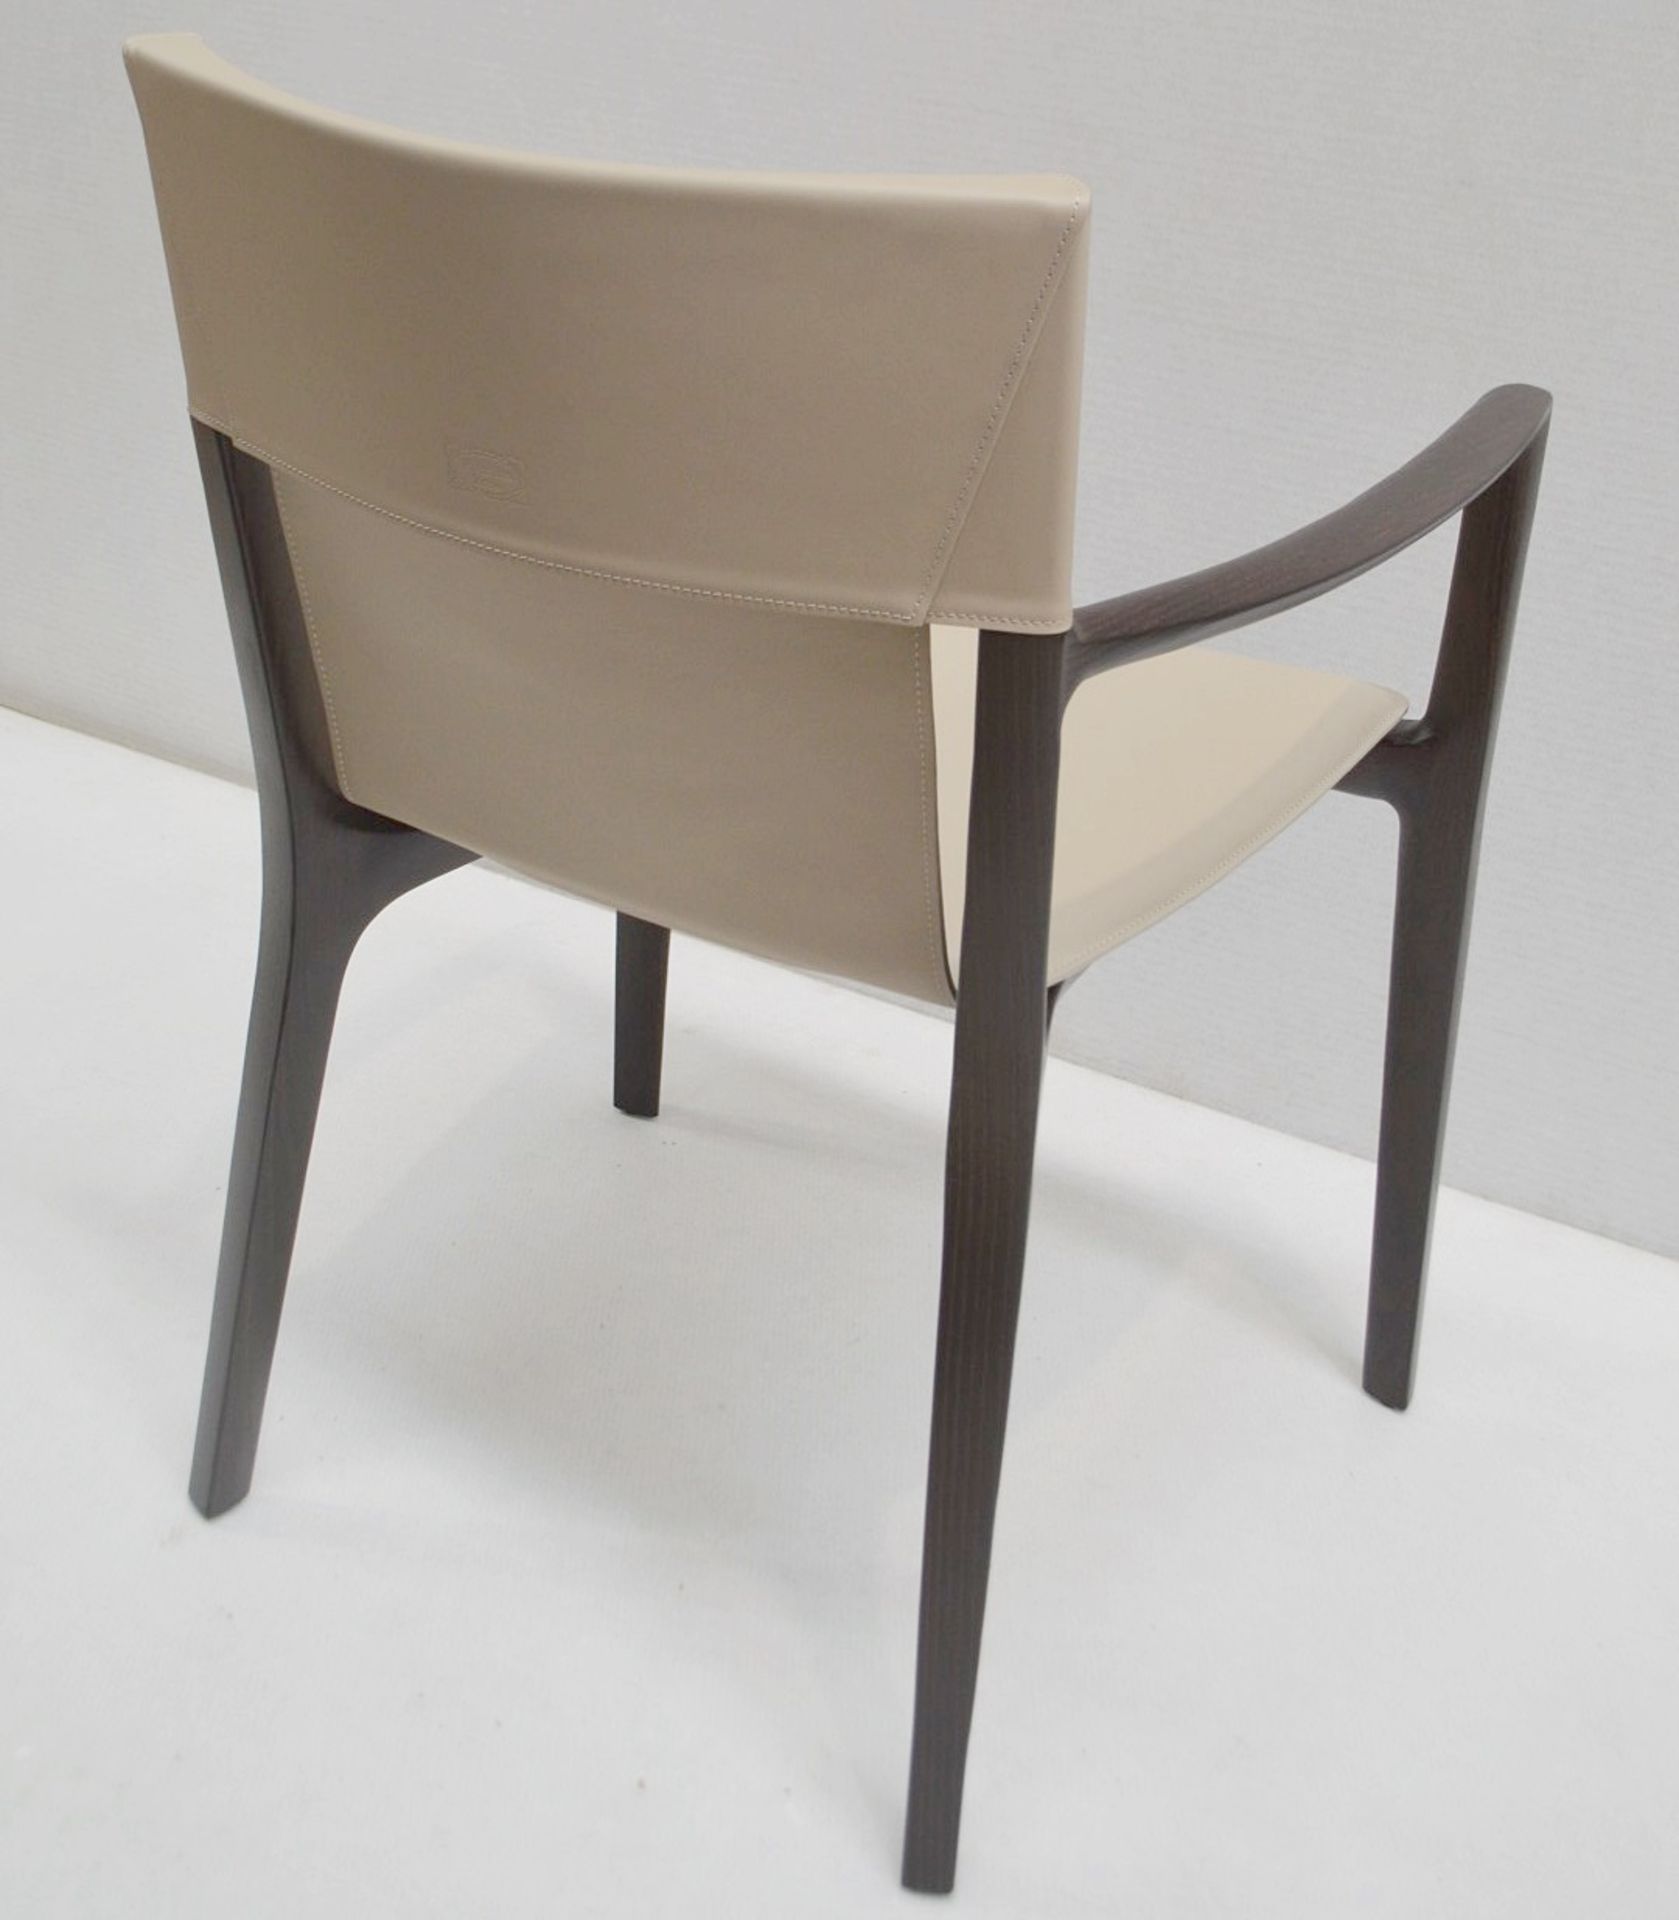 A Pair Of POLTRONA FRAU 'Isadora' Chairs With Arms Upholstered In Beige Saddle Leather - RRP £4,200 - Image 9 of 16